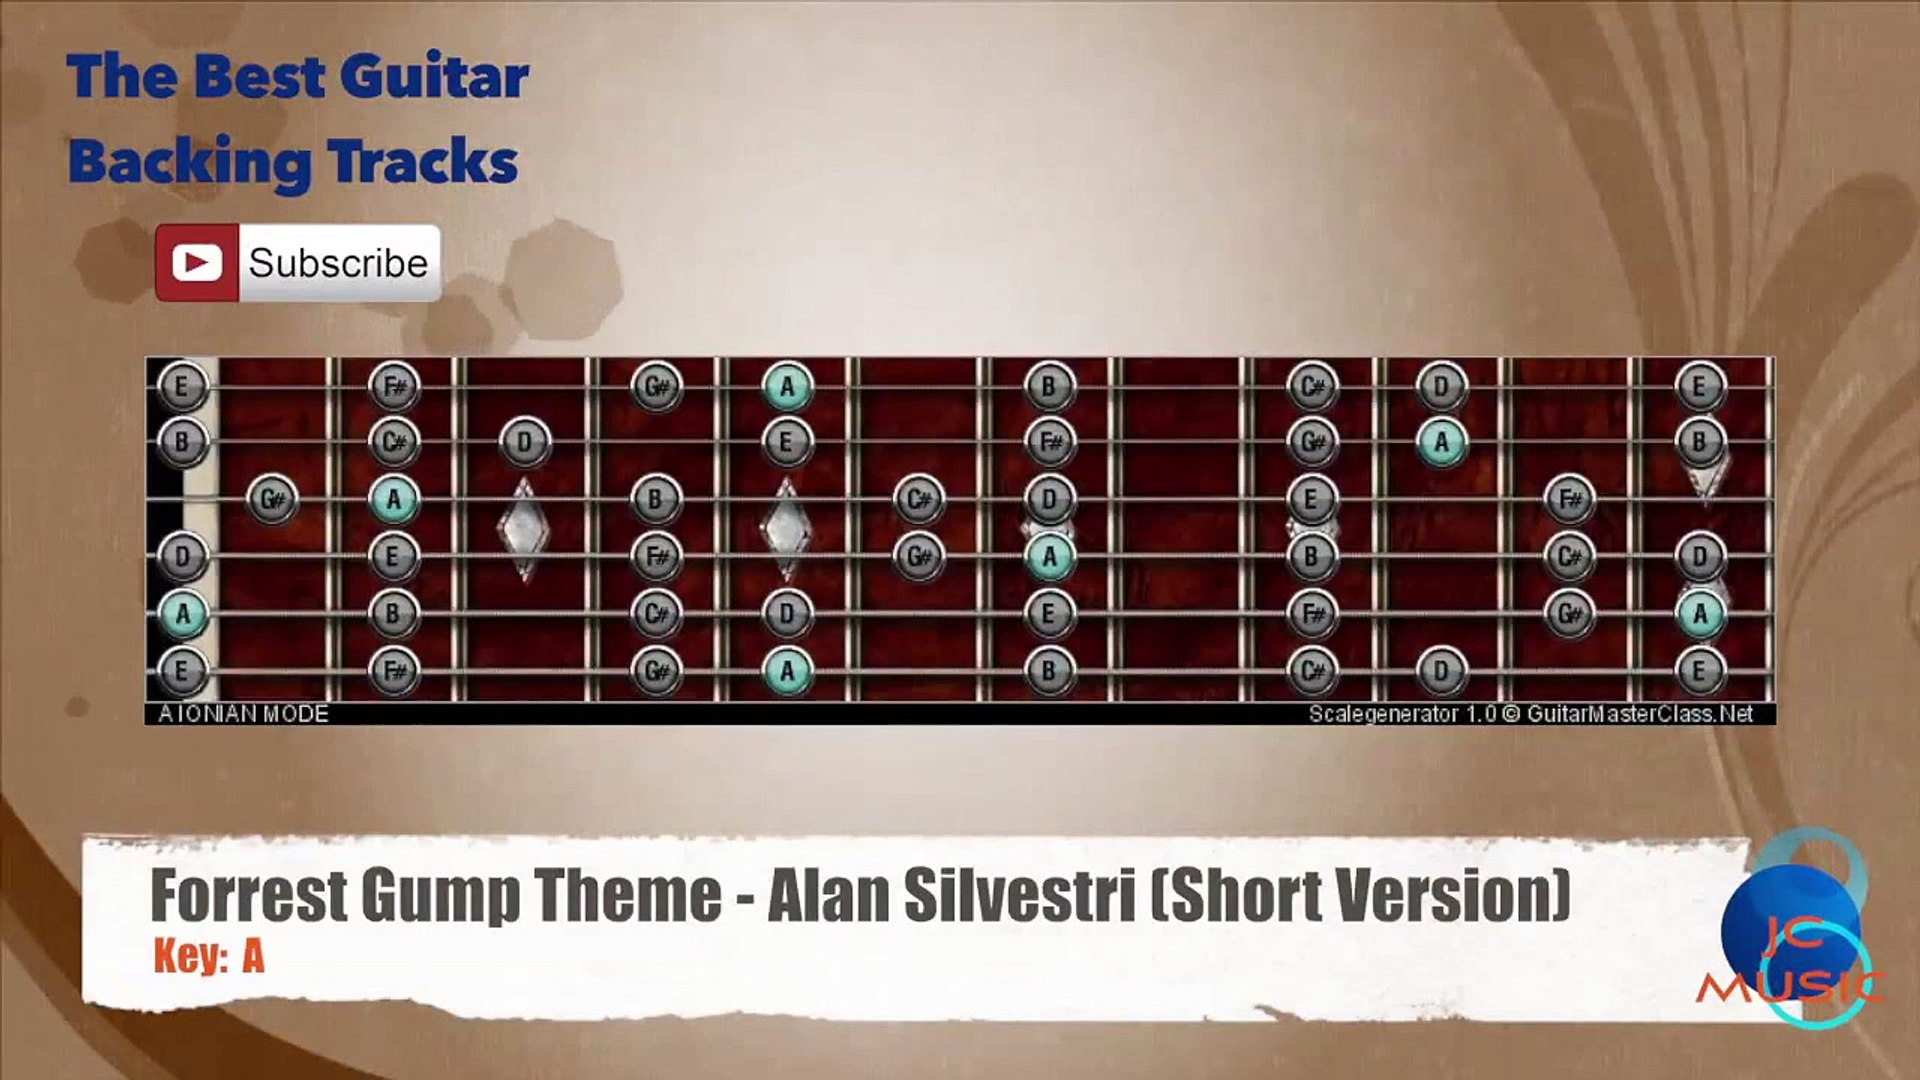 Forrest Gump Theme - Alan Silvestri Guitar Backing Track with scale chart